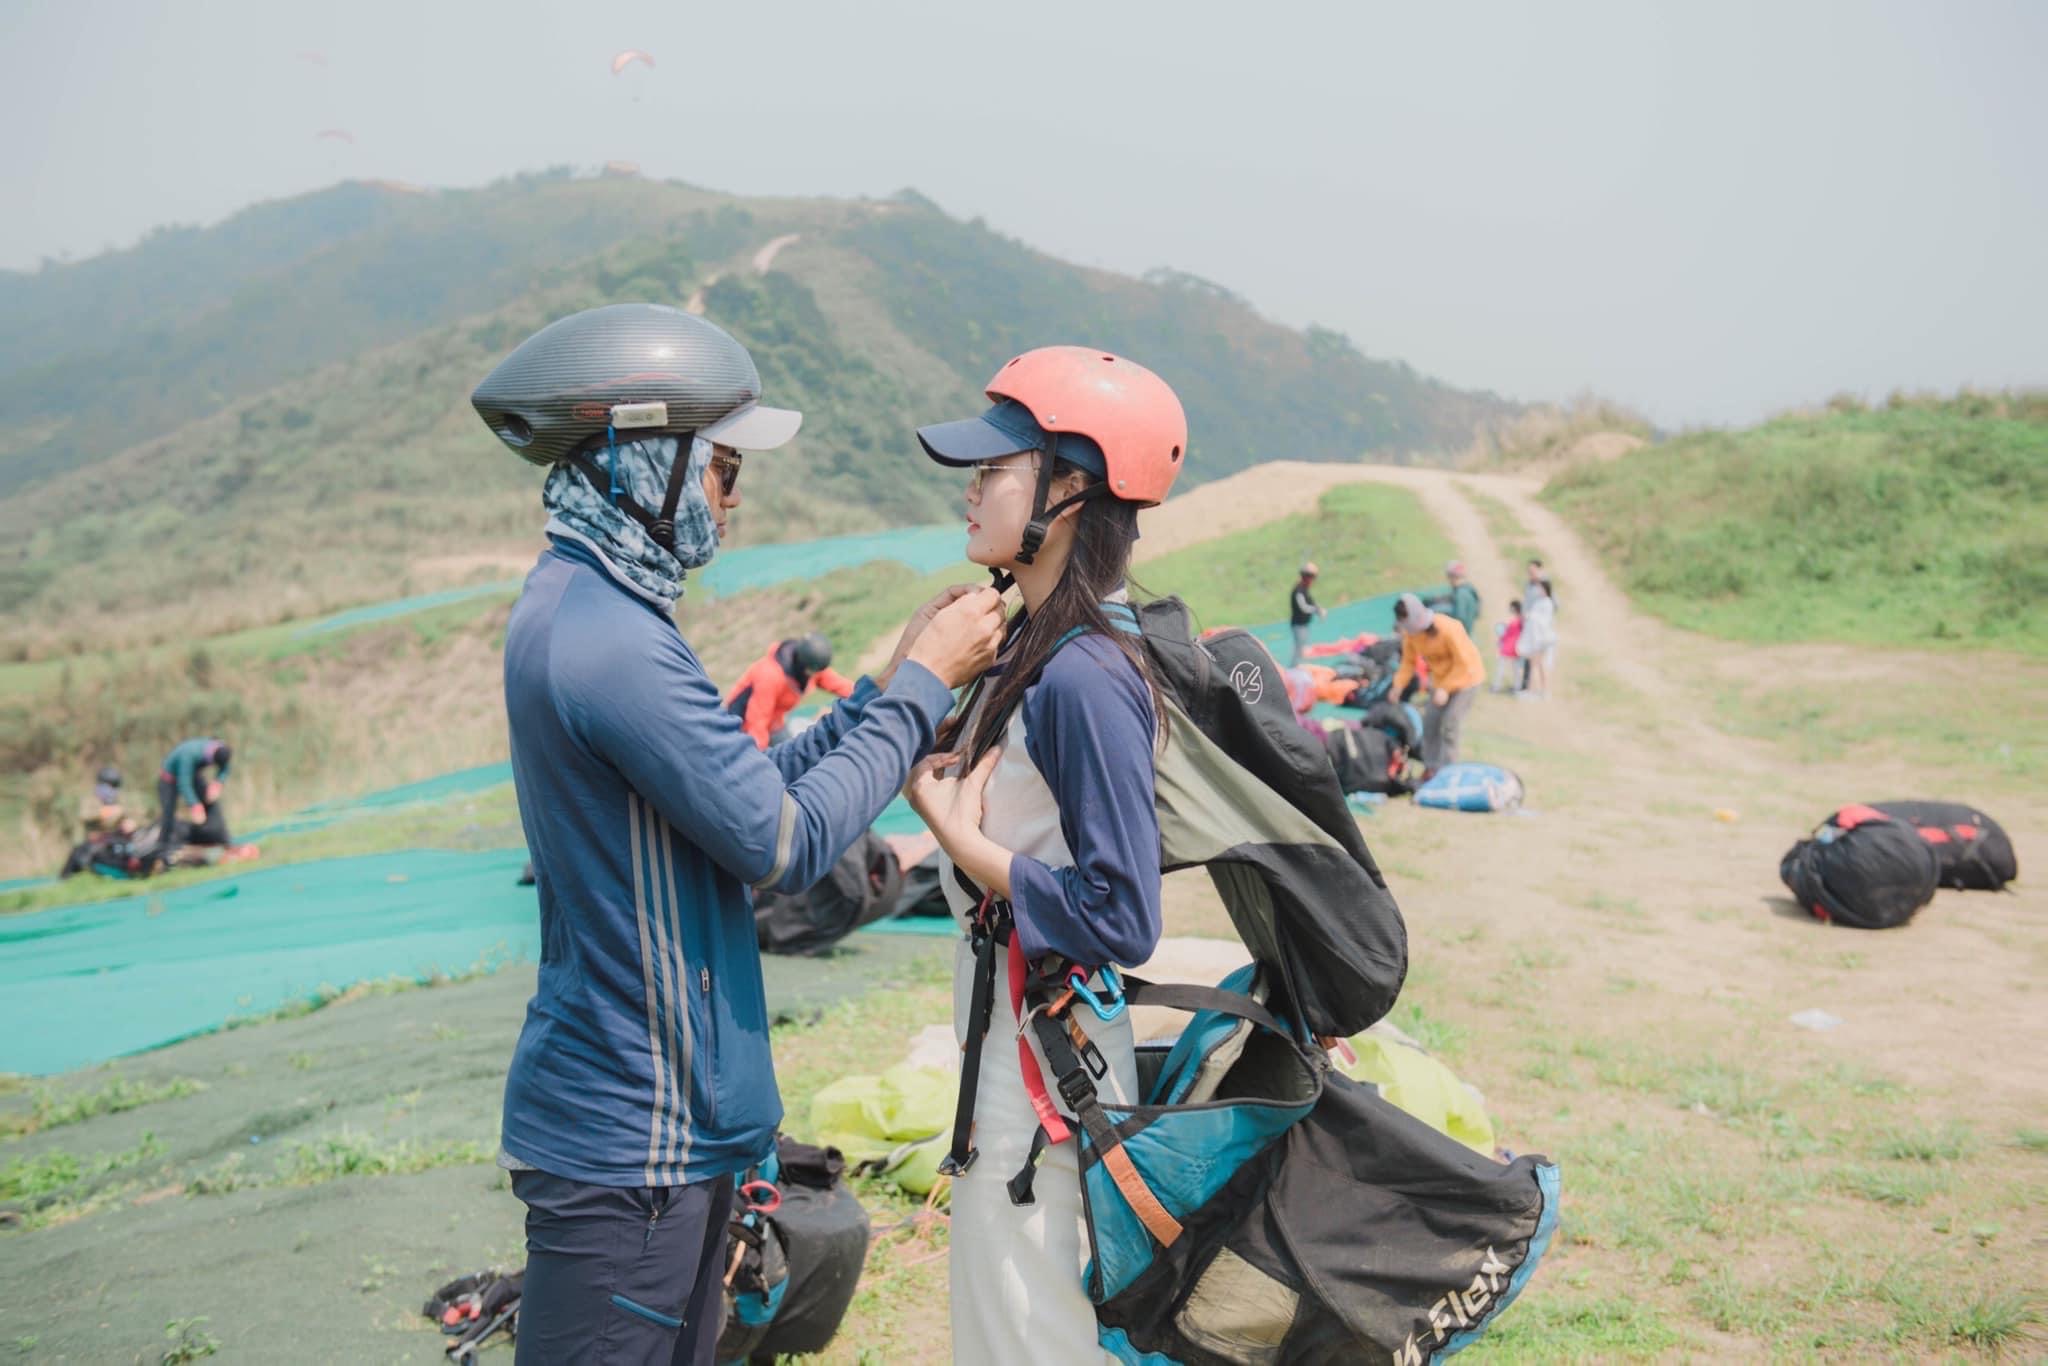 A professional equips safety gadgets for a tourist before taking off for paragliding at Bu Hill on the outskirts of Hanoi, Vietnam. Photo by courtesy of Mebayluon